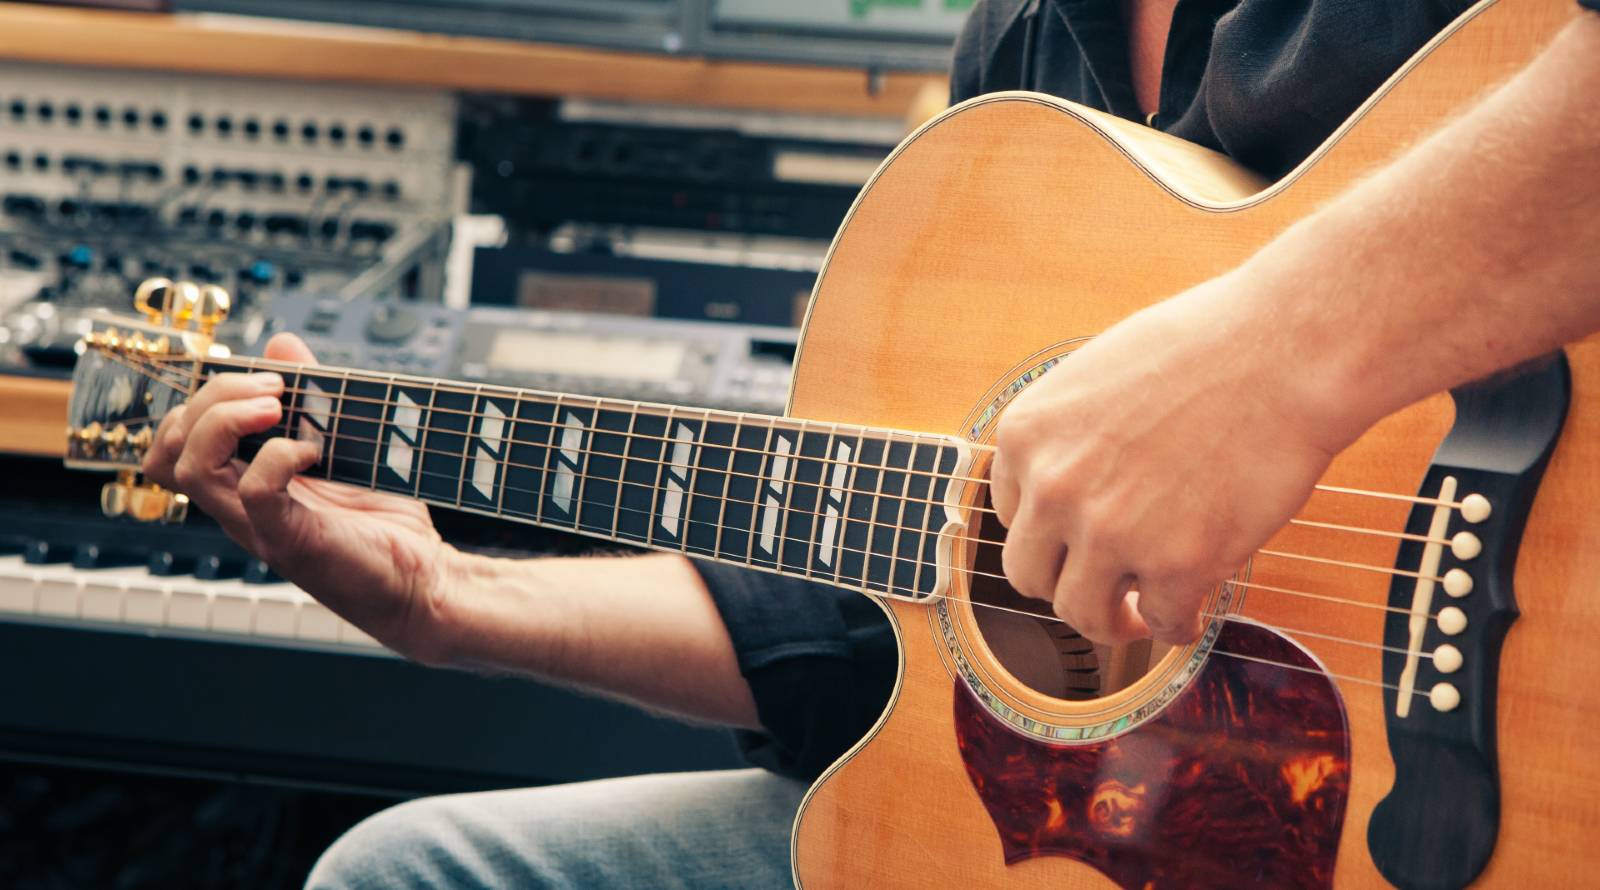 How To Turn A Right-Handed Acoustic Guitar Left-Handed